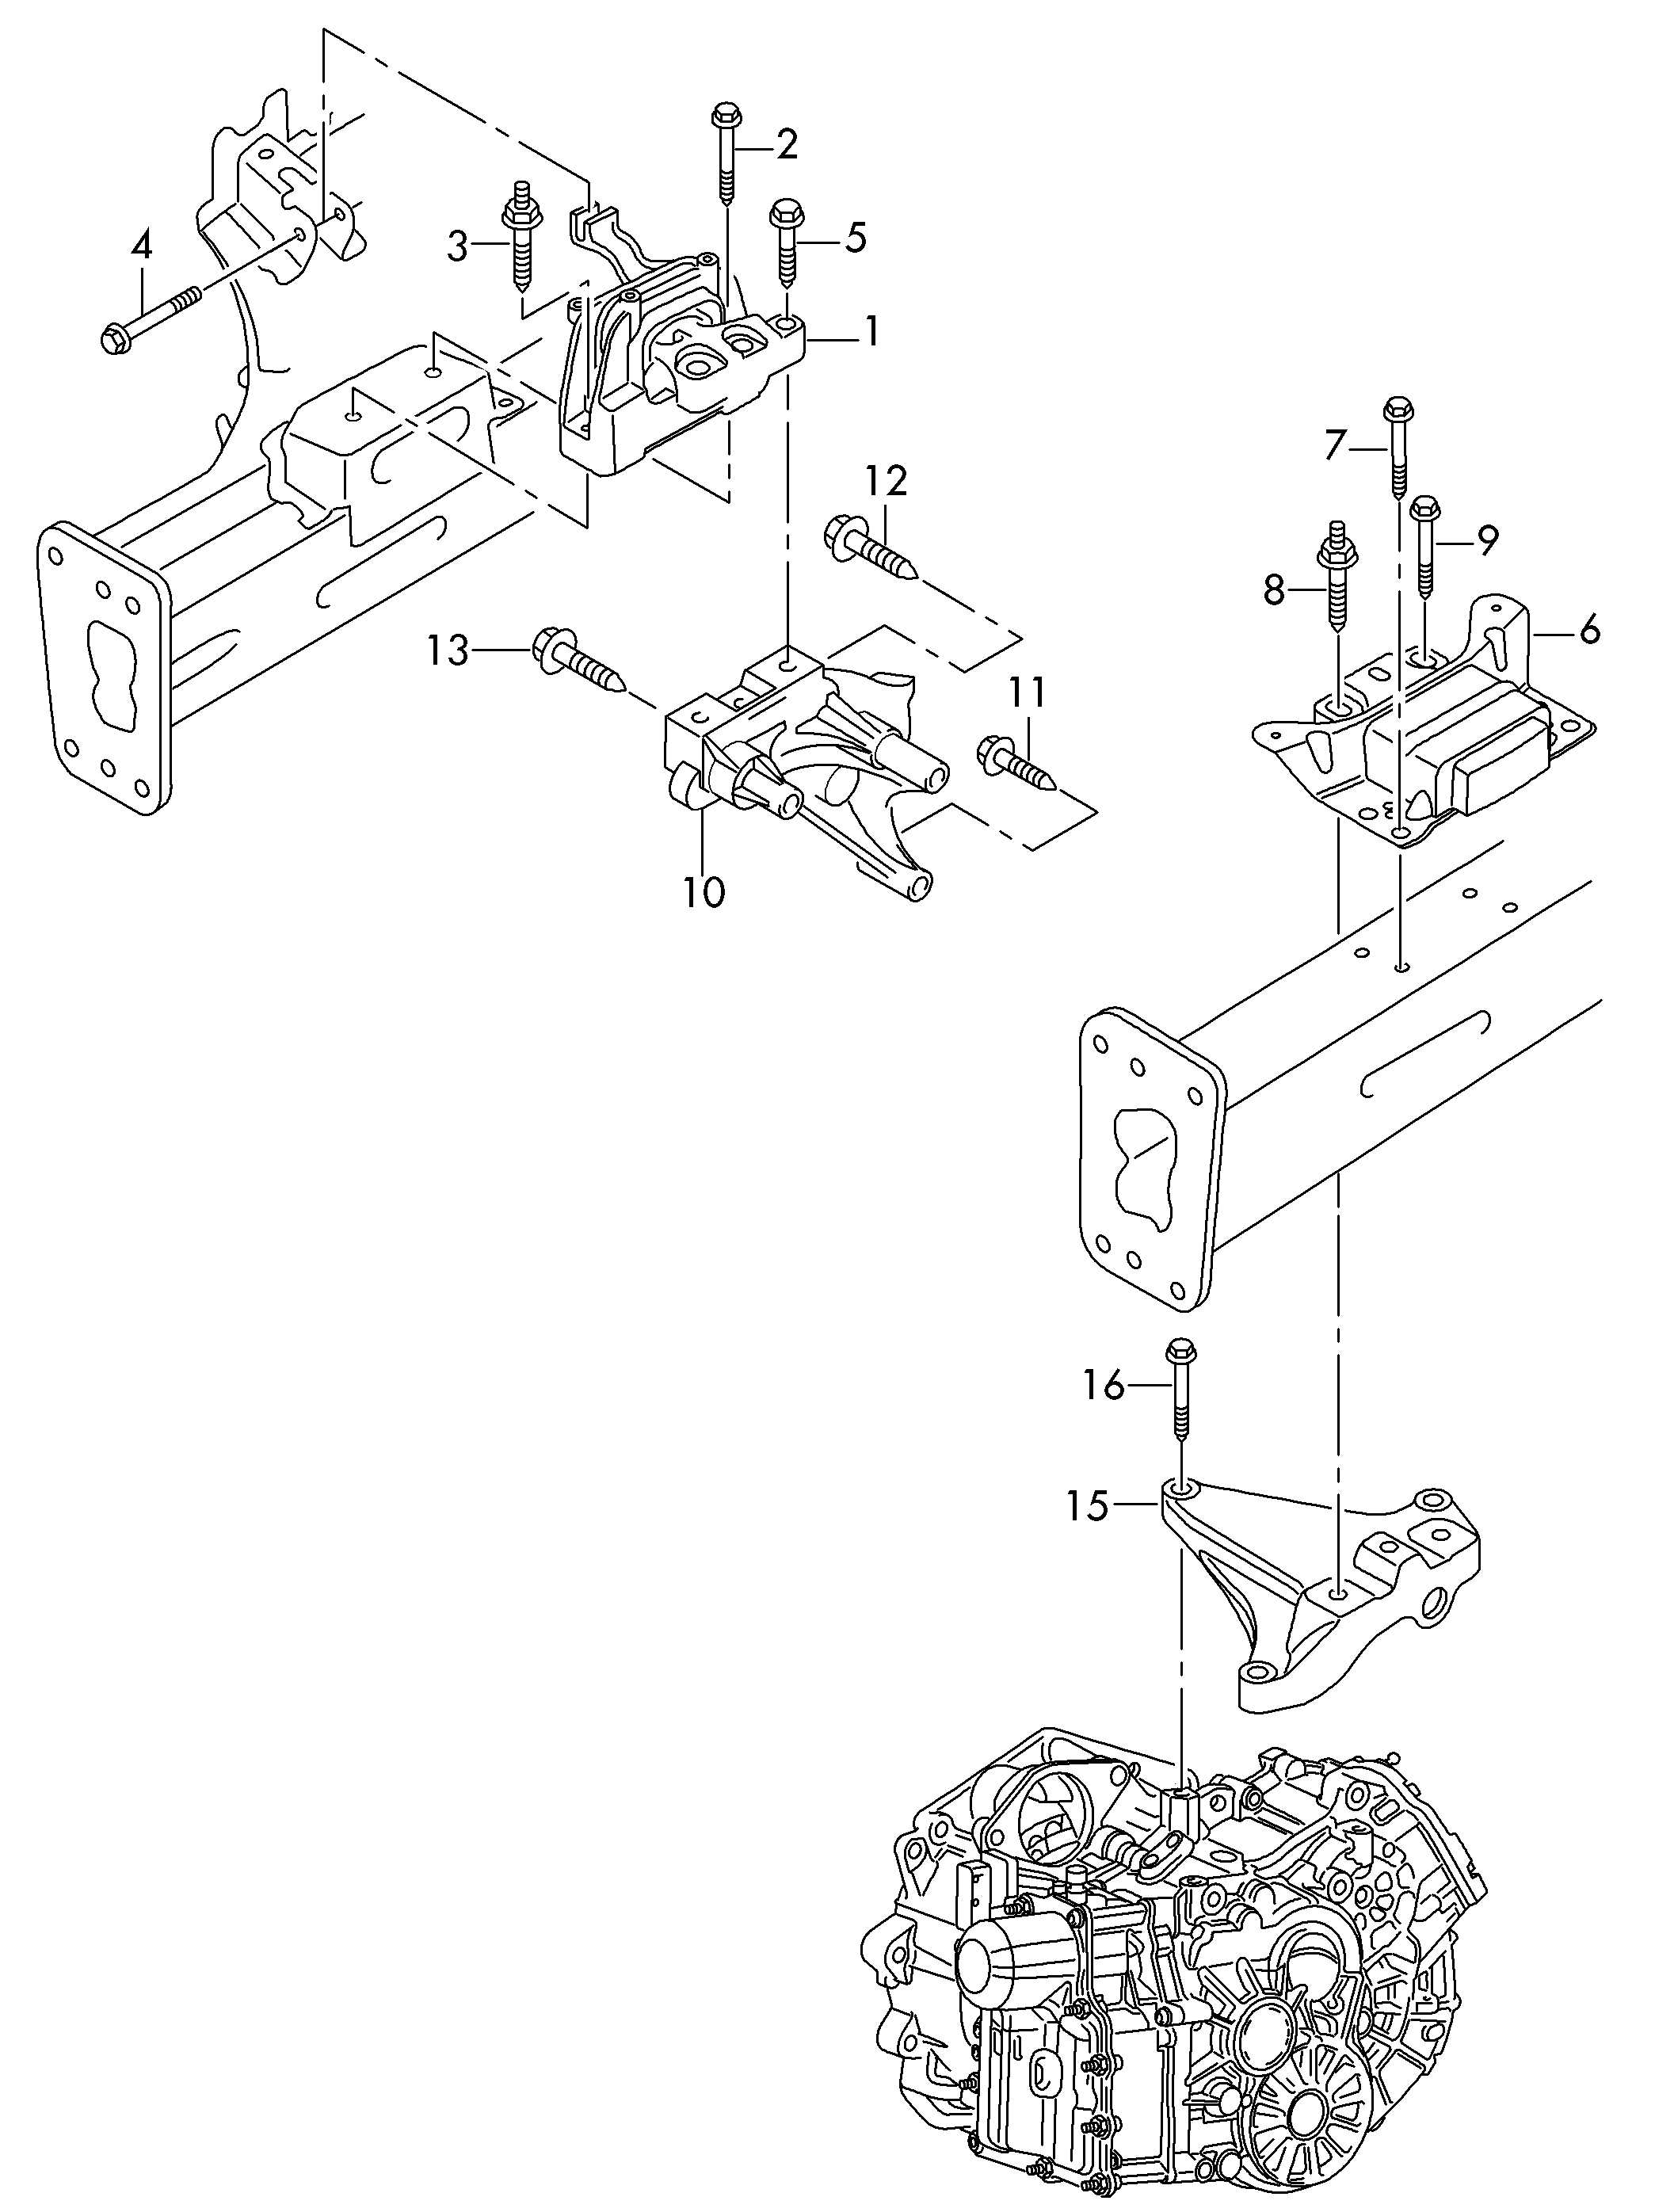 mounting parts for engine and<br>transmission 1.6-2.0 litres - Golf/Variant/4Motion - golf